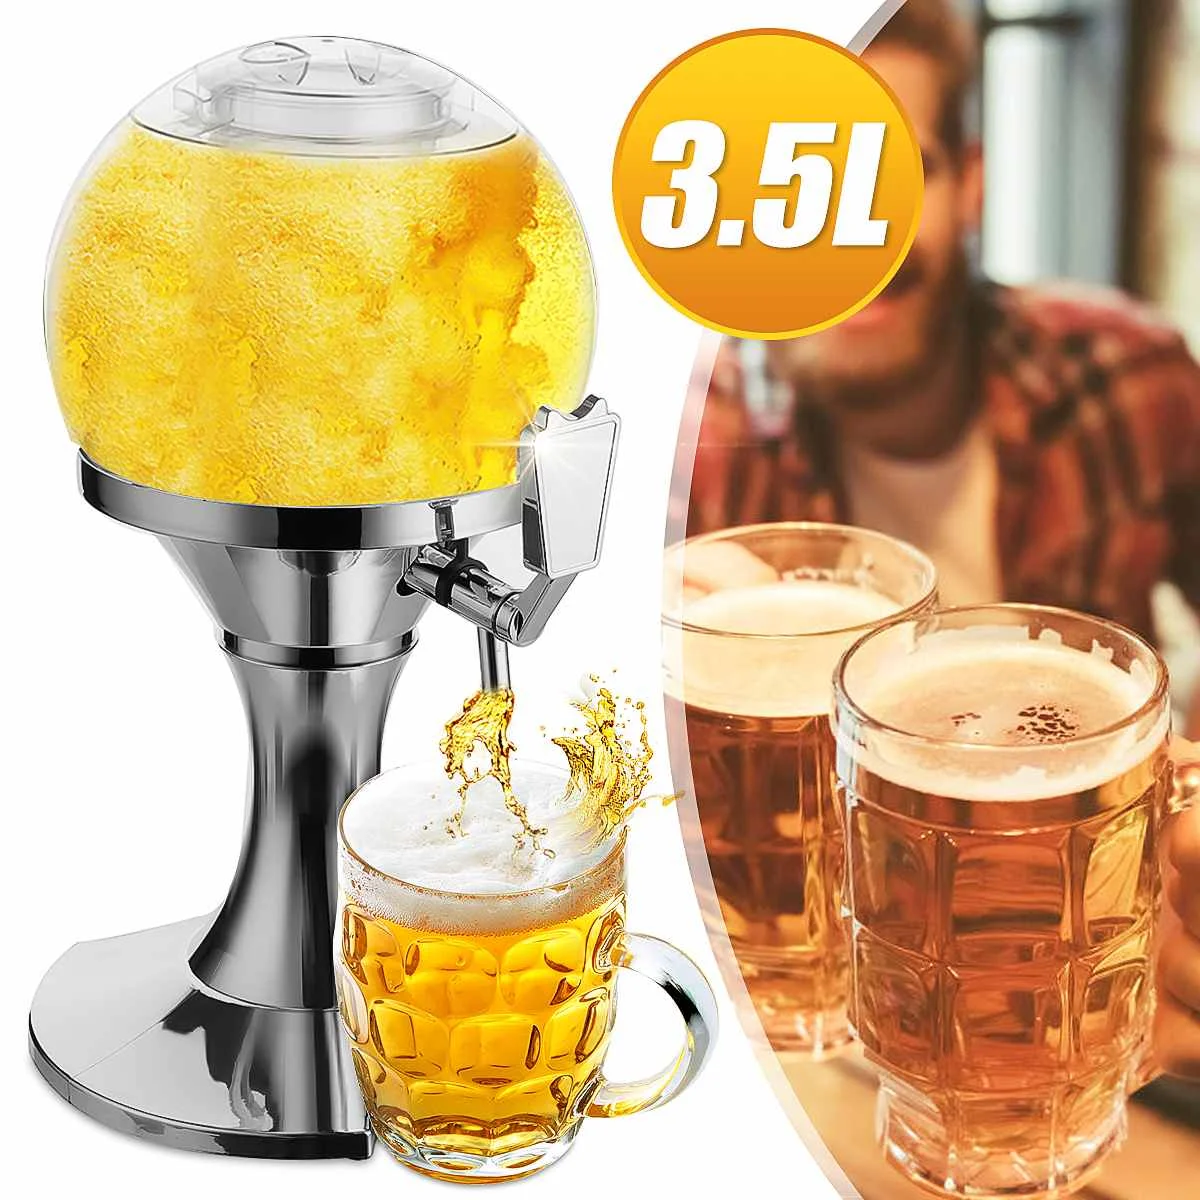 

3.5L Bar Beer Tower Dispenser Party Wine Beer Water juice Beverage Tabletops Home Bar Liquid Drinking Ice Core Container Pourer